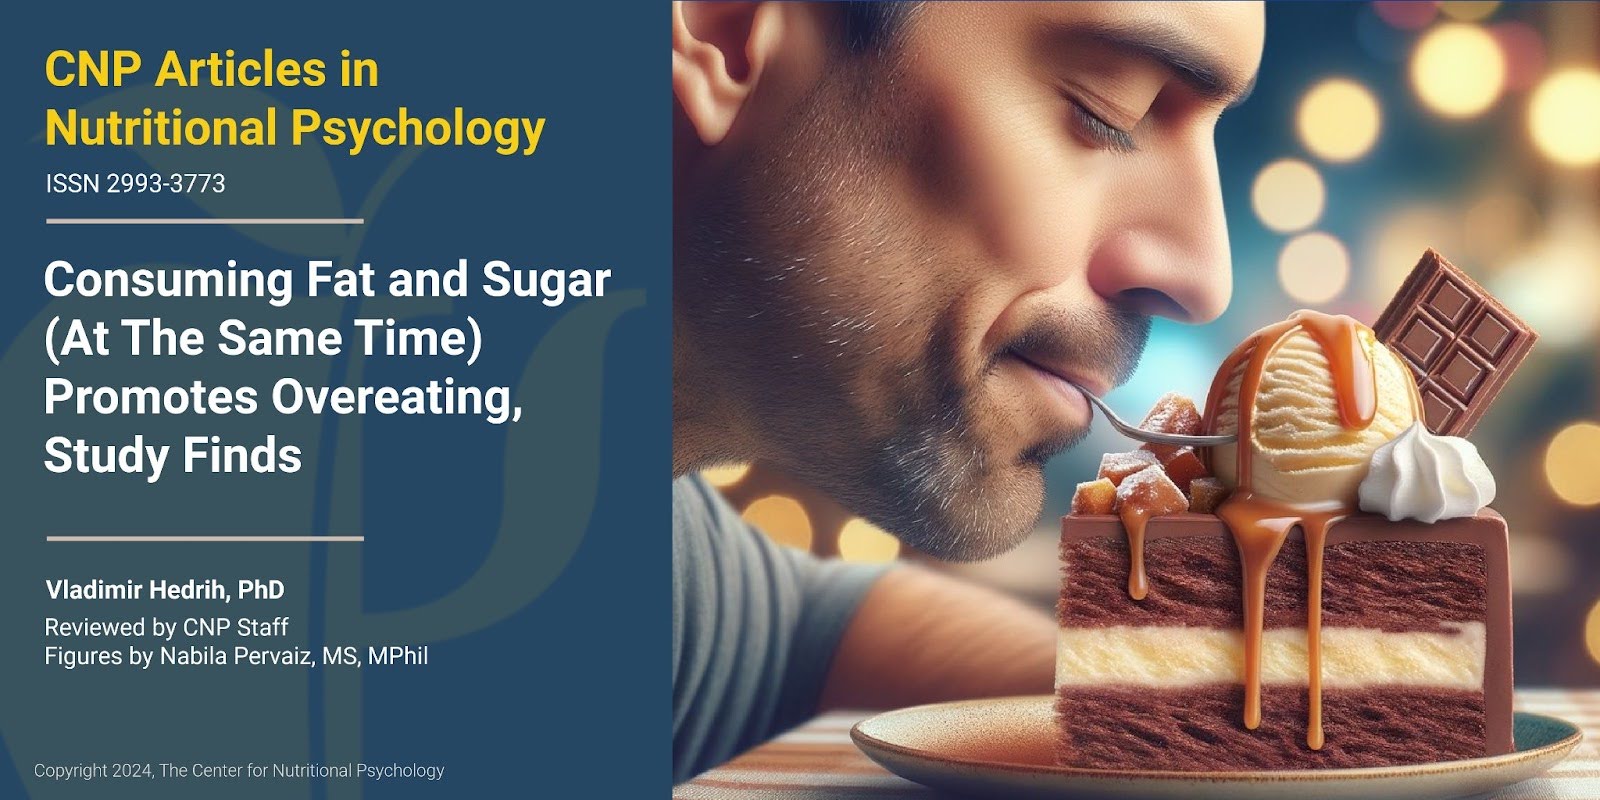 Consuming Fat and Sugar (At The Same Time) Promotes Overeating, Study Finds